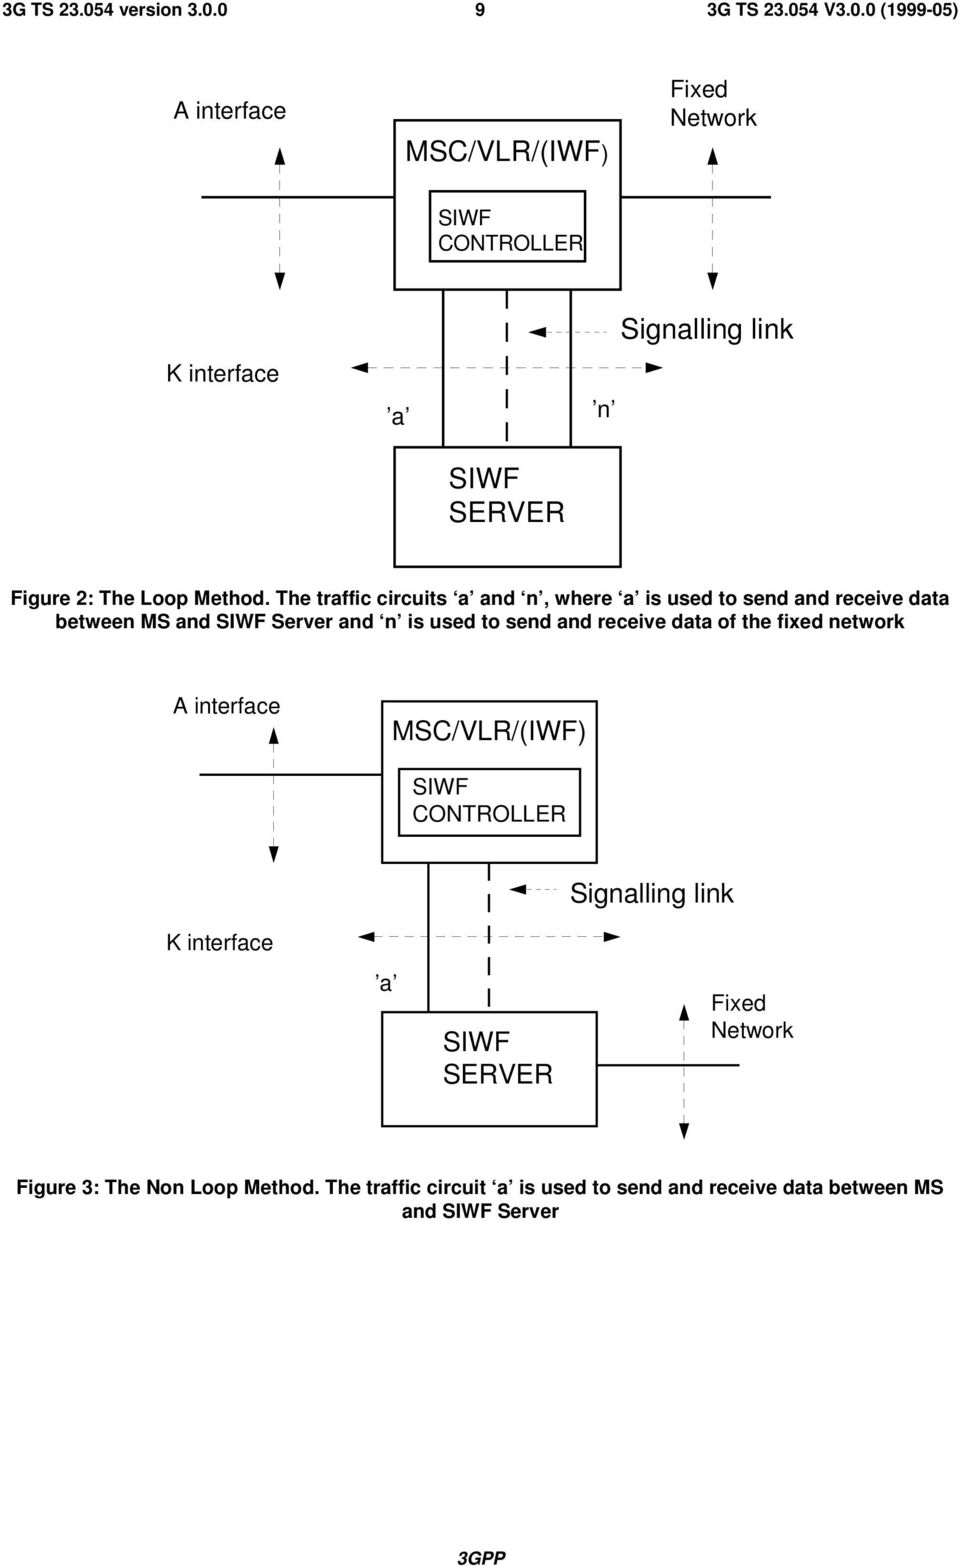 The traffic circuits a and n, where a is used to send and receive data between MS and SIWF Server and n is used to send and